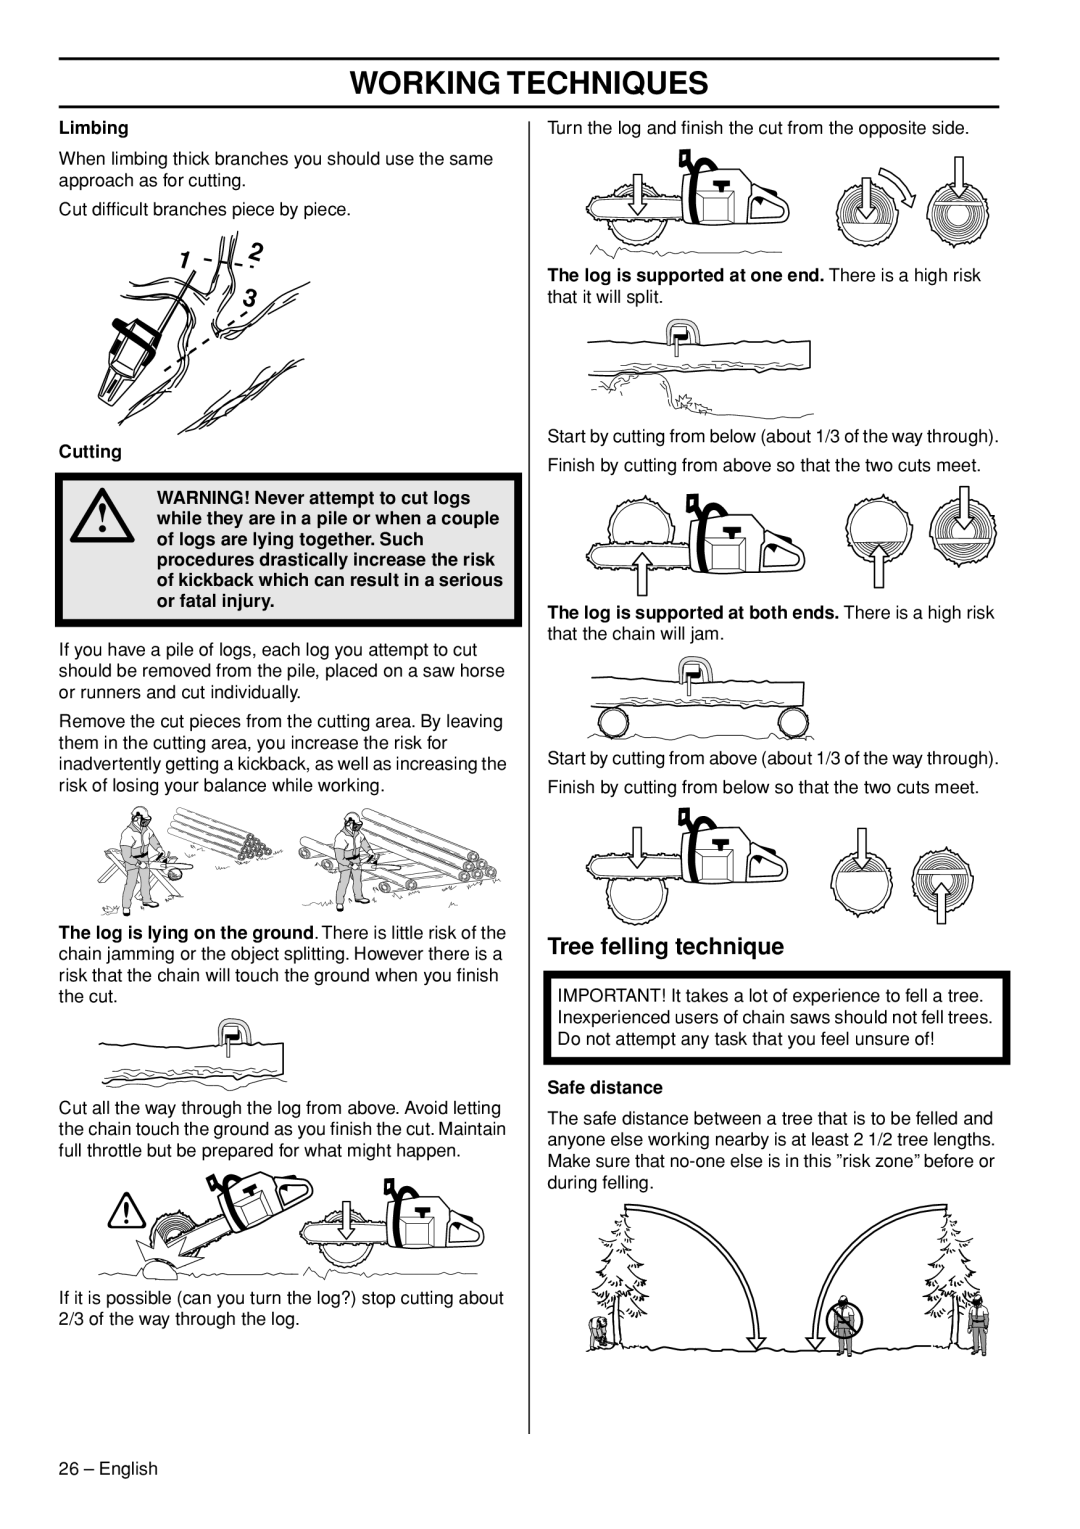 Husqvarna 1153181-26 manual Tree felling technique, Limbing, Cutting WARNING! Never attempt to cut logs, Safe distance 